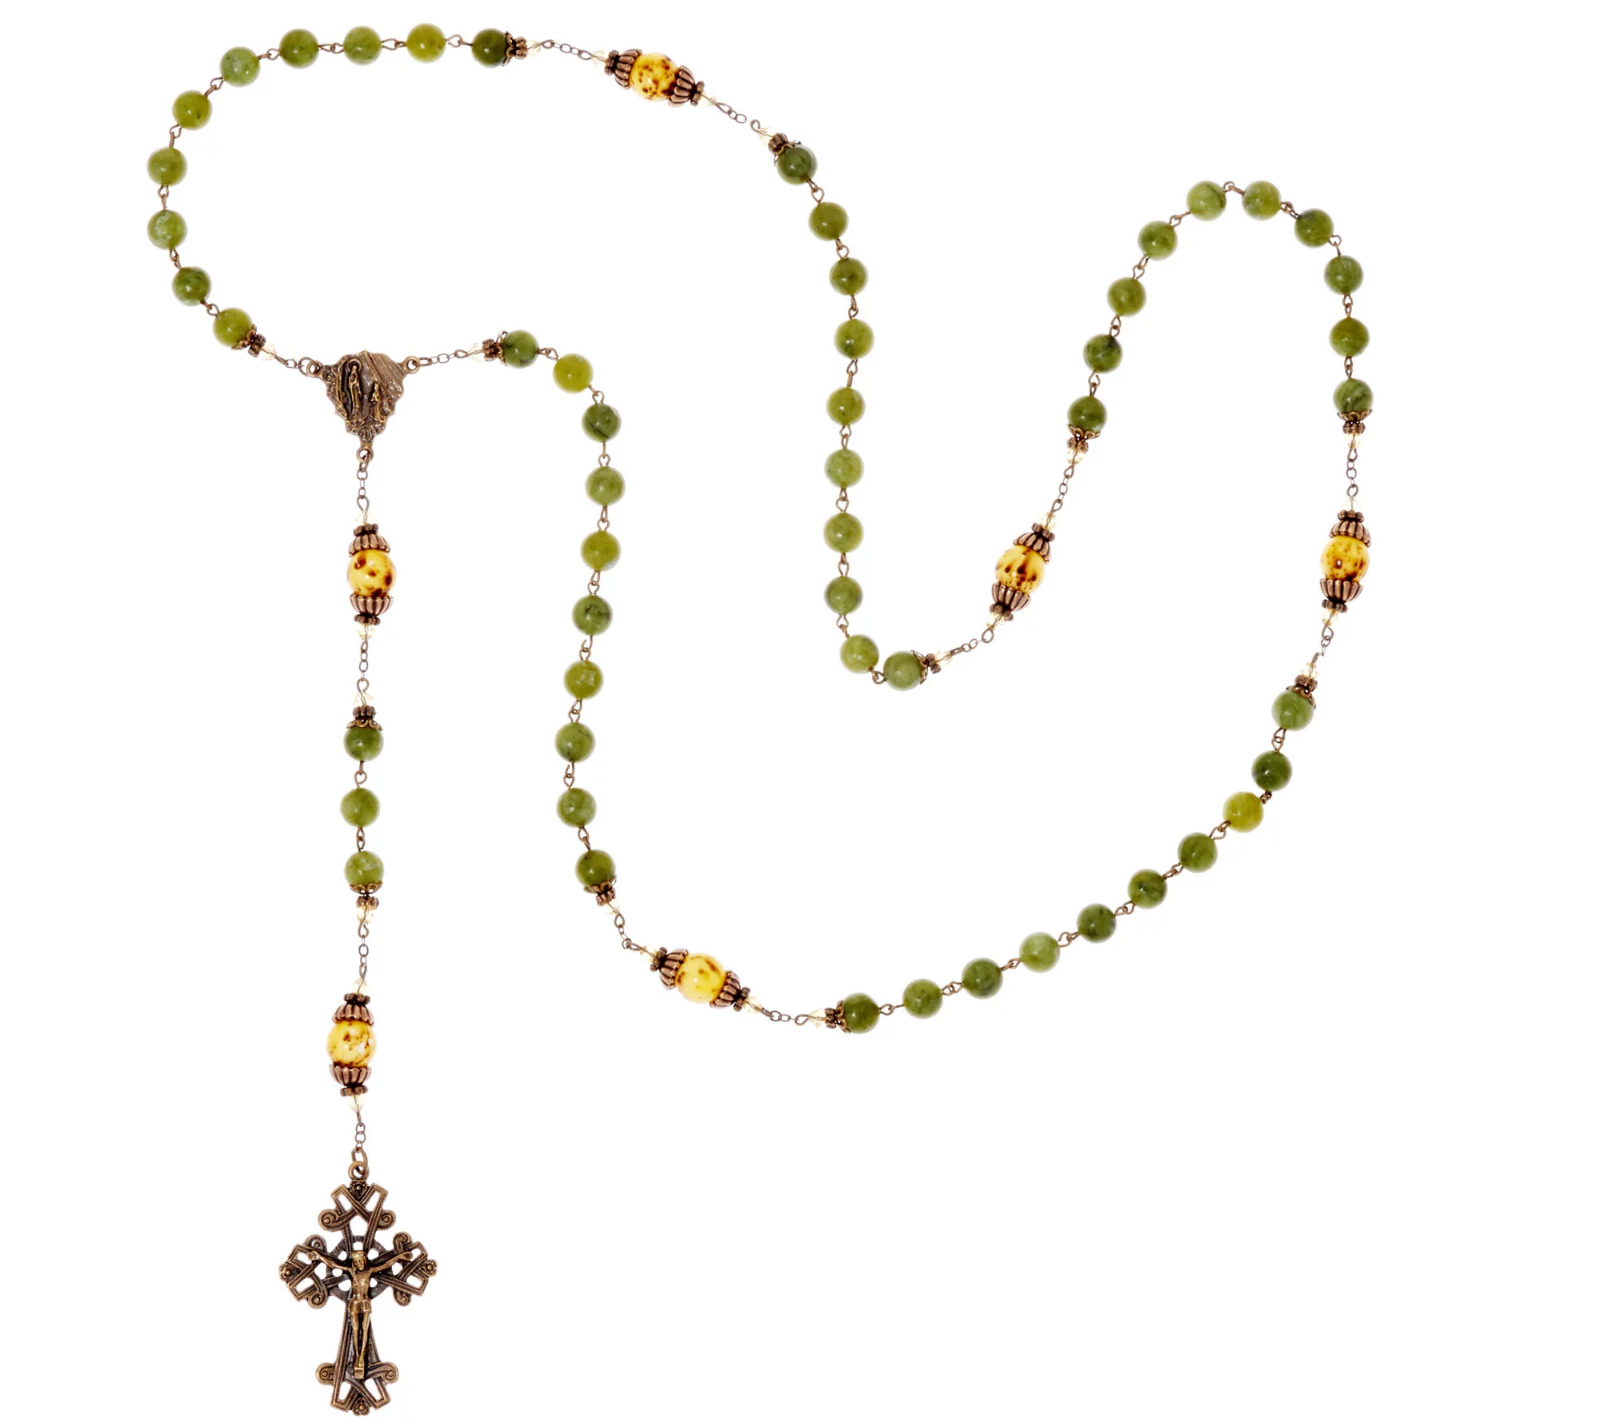 Connemara Marble Glass Beads Cross Antiqued Rosary Necklace 24-1/2\